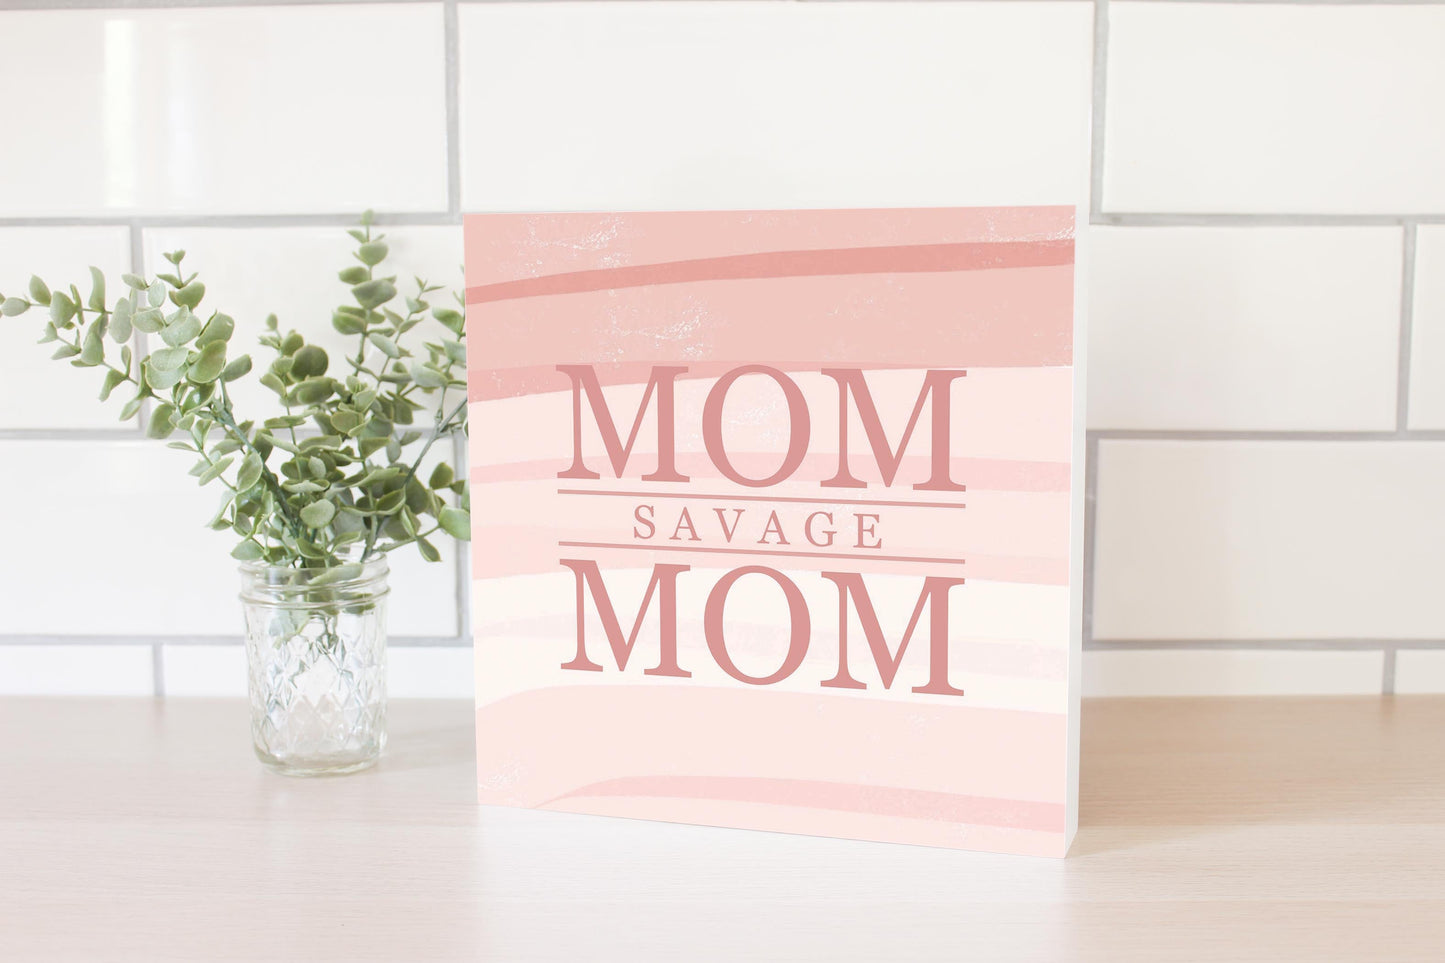 Mother's Day Mom Savage Mom | 10x10